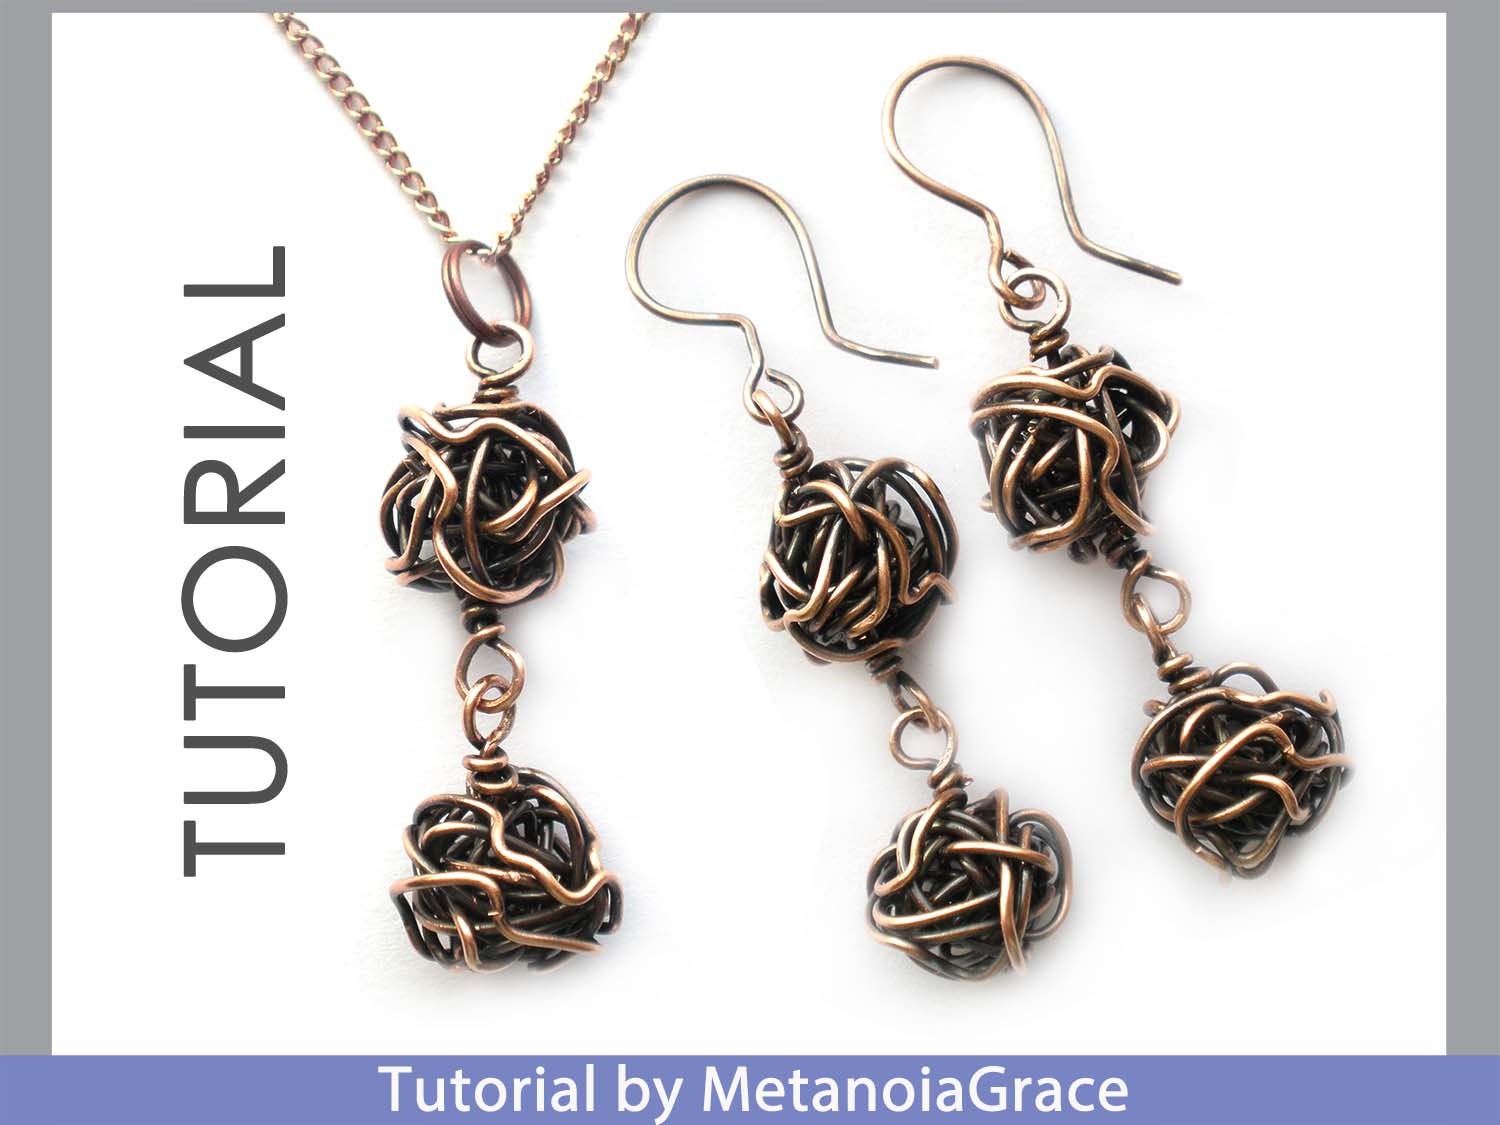 Face-Framing Wire Earrings Tutorial – Jewelry Making Journal